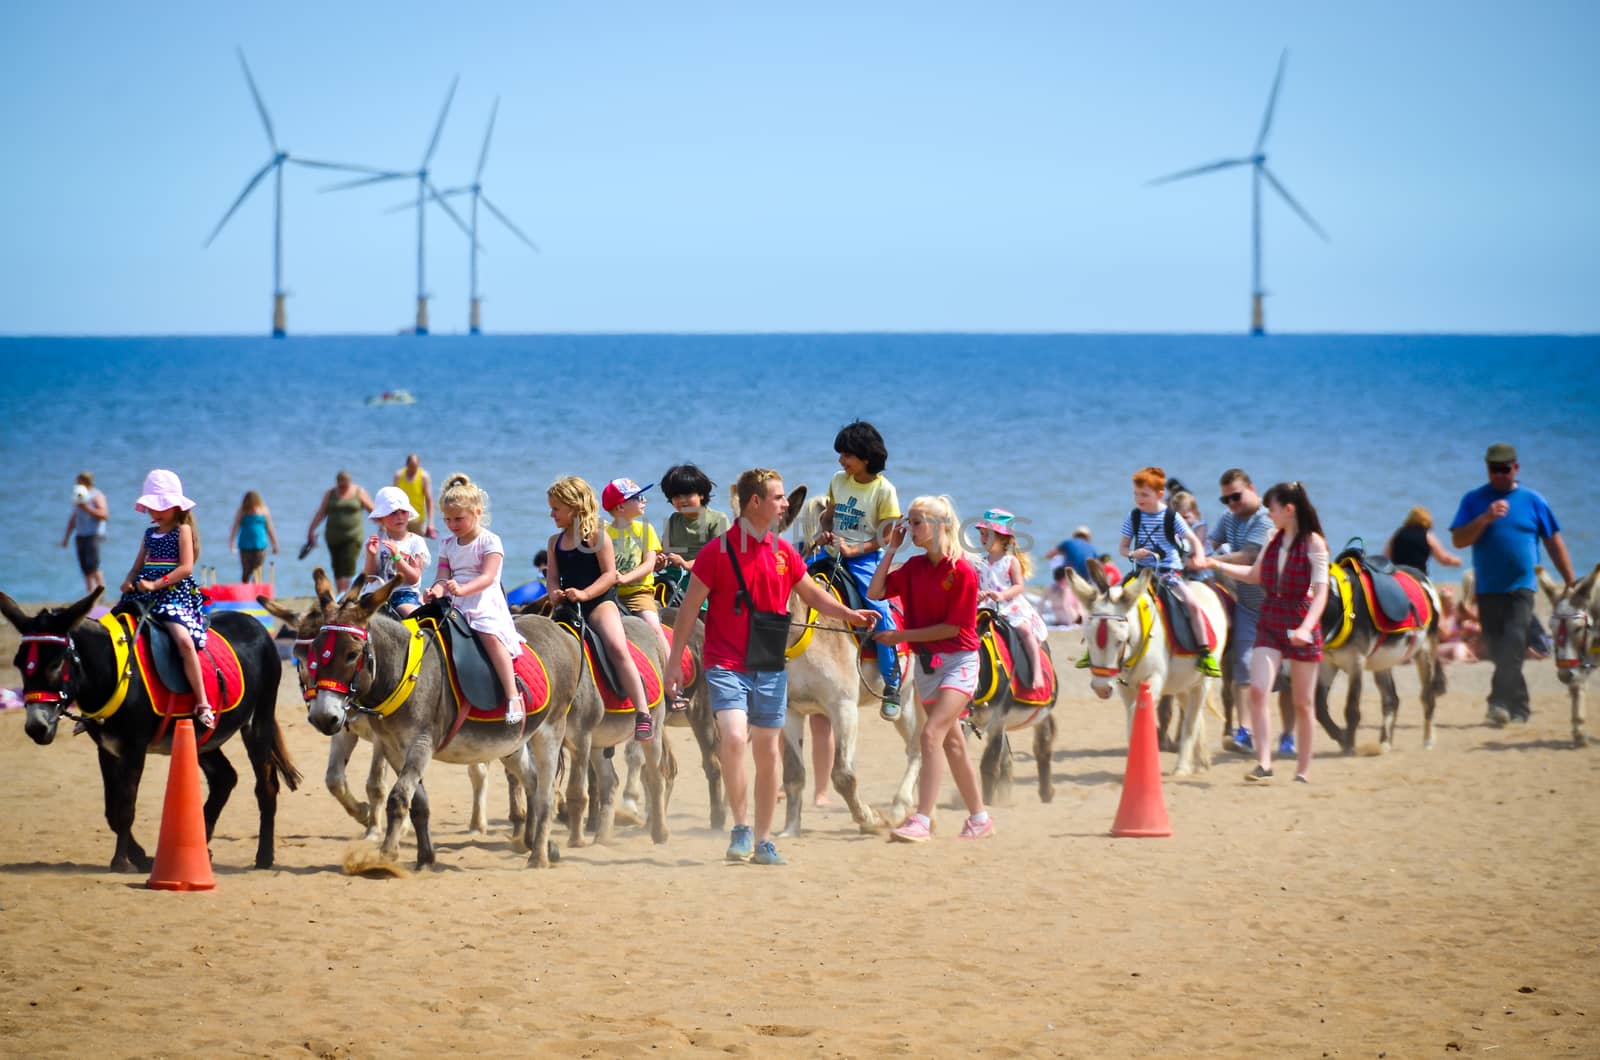 Skegnes-England July-2016 photo taken on the beach shows children riding on donkey with supervisor. Editorial photo